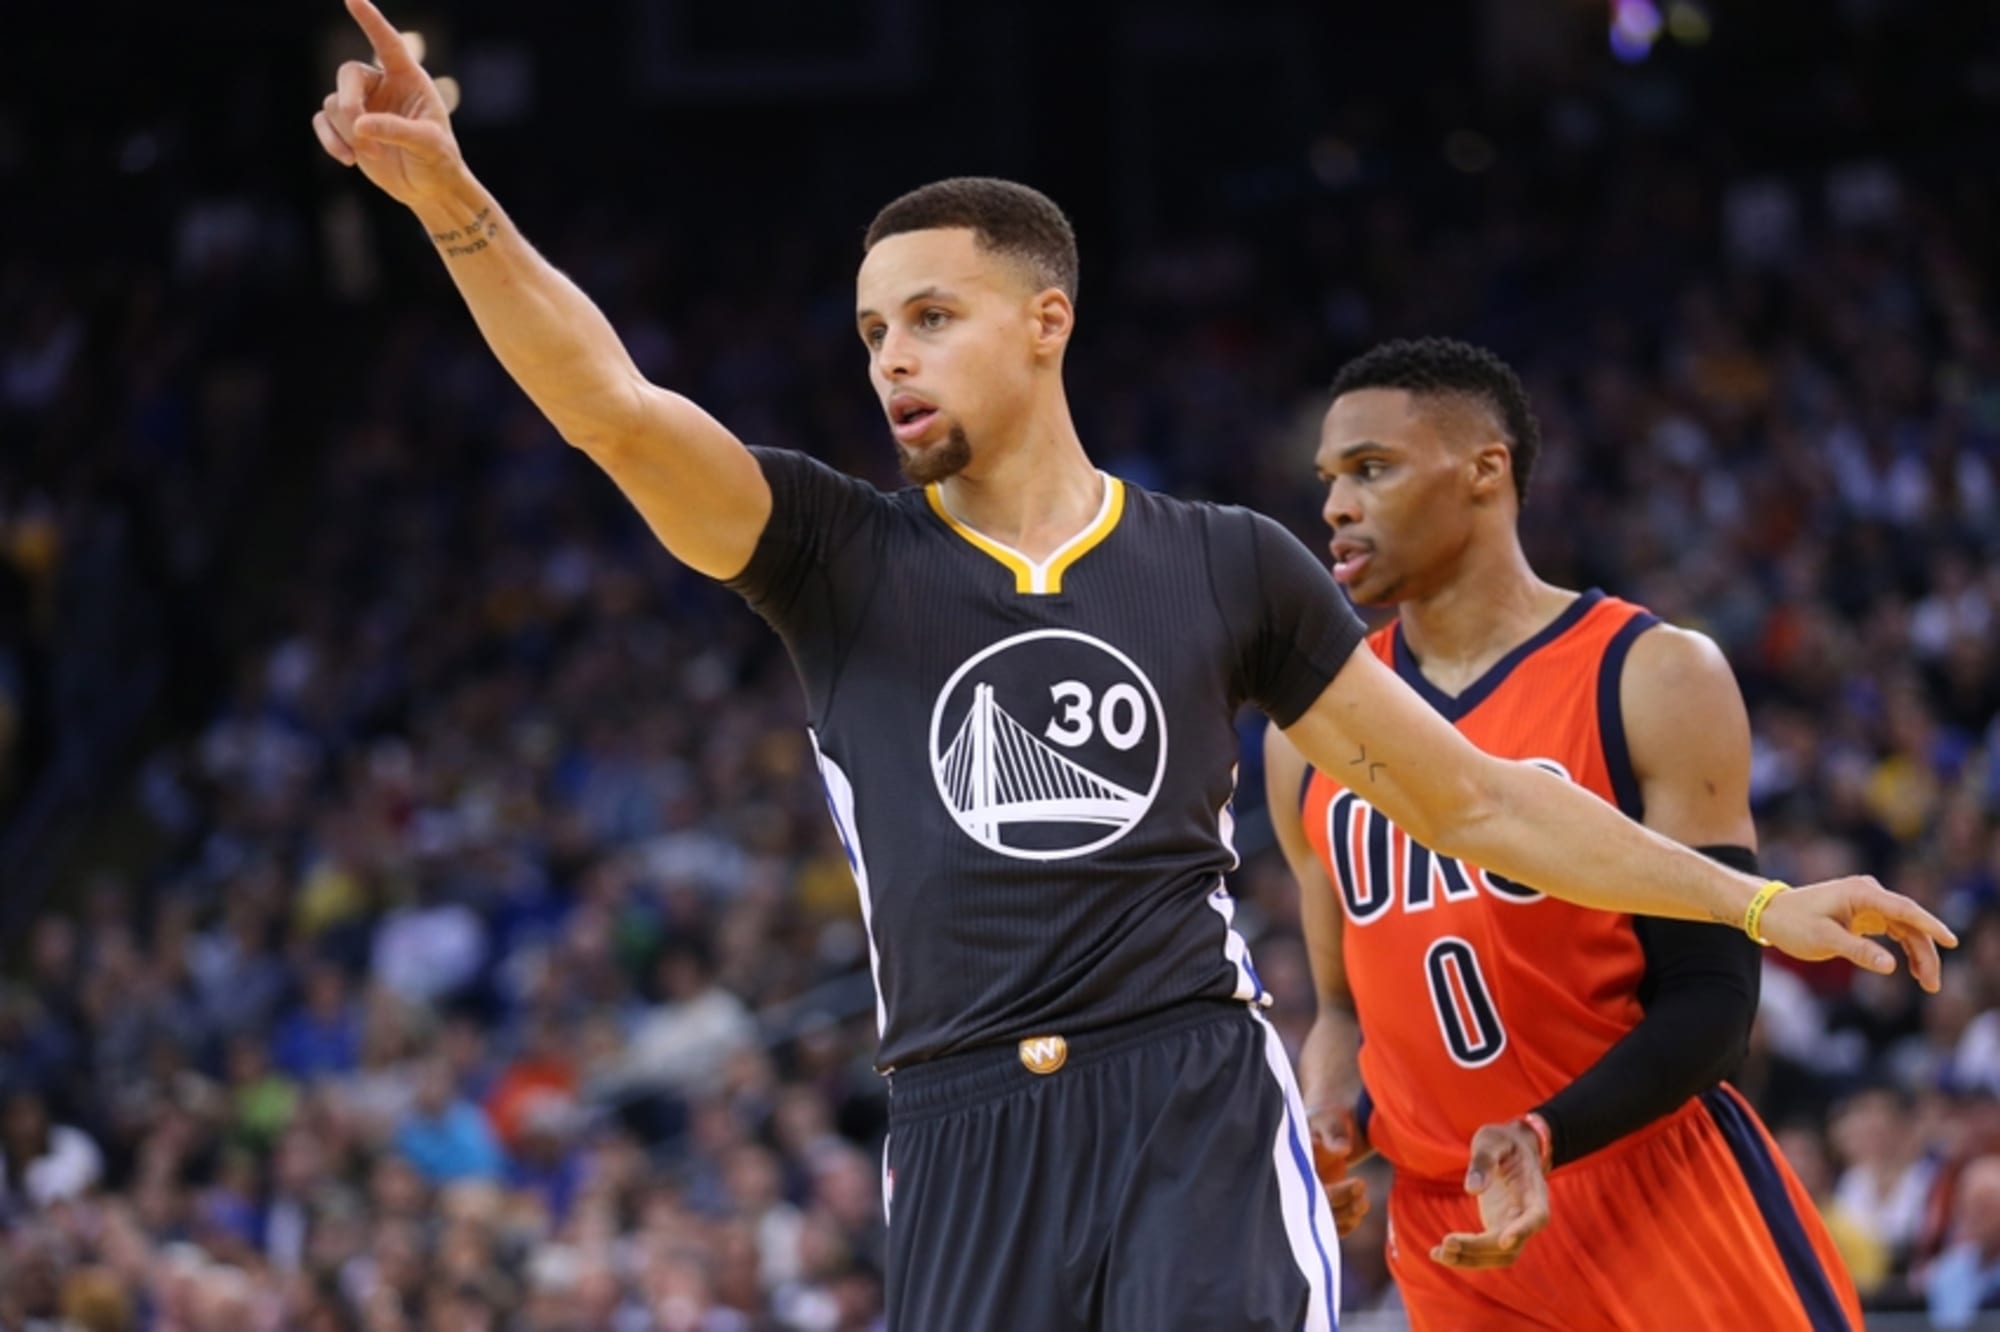 Warriors vs. Thunder Live stream and preview